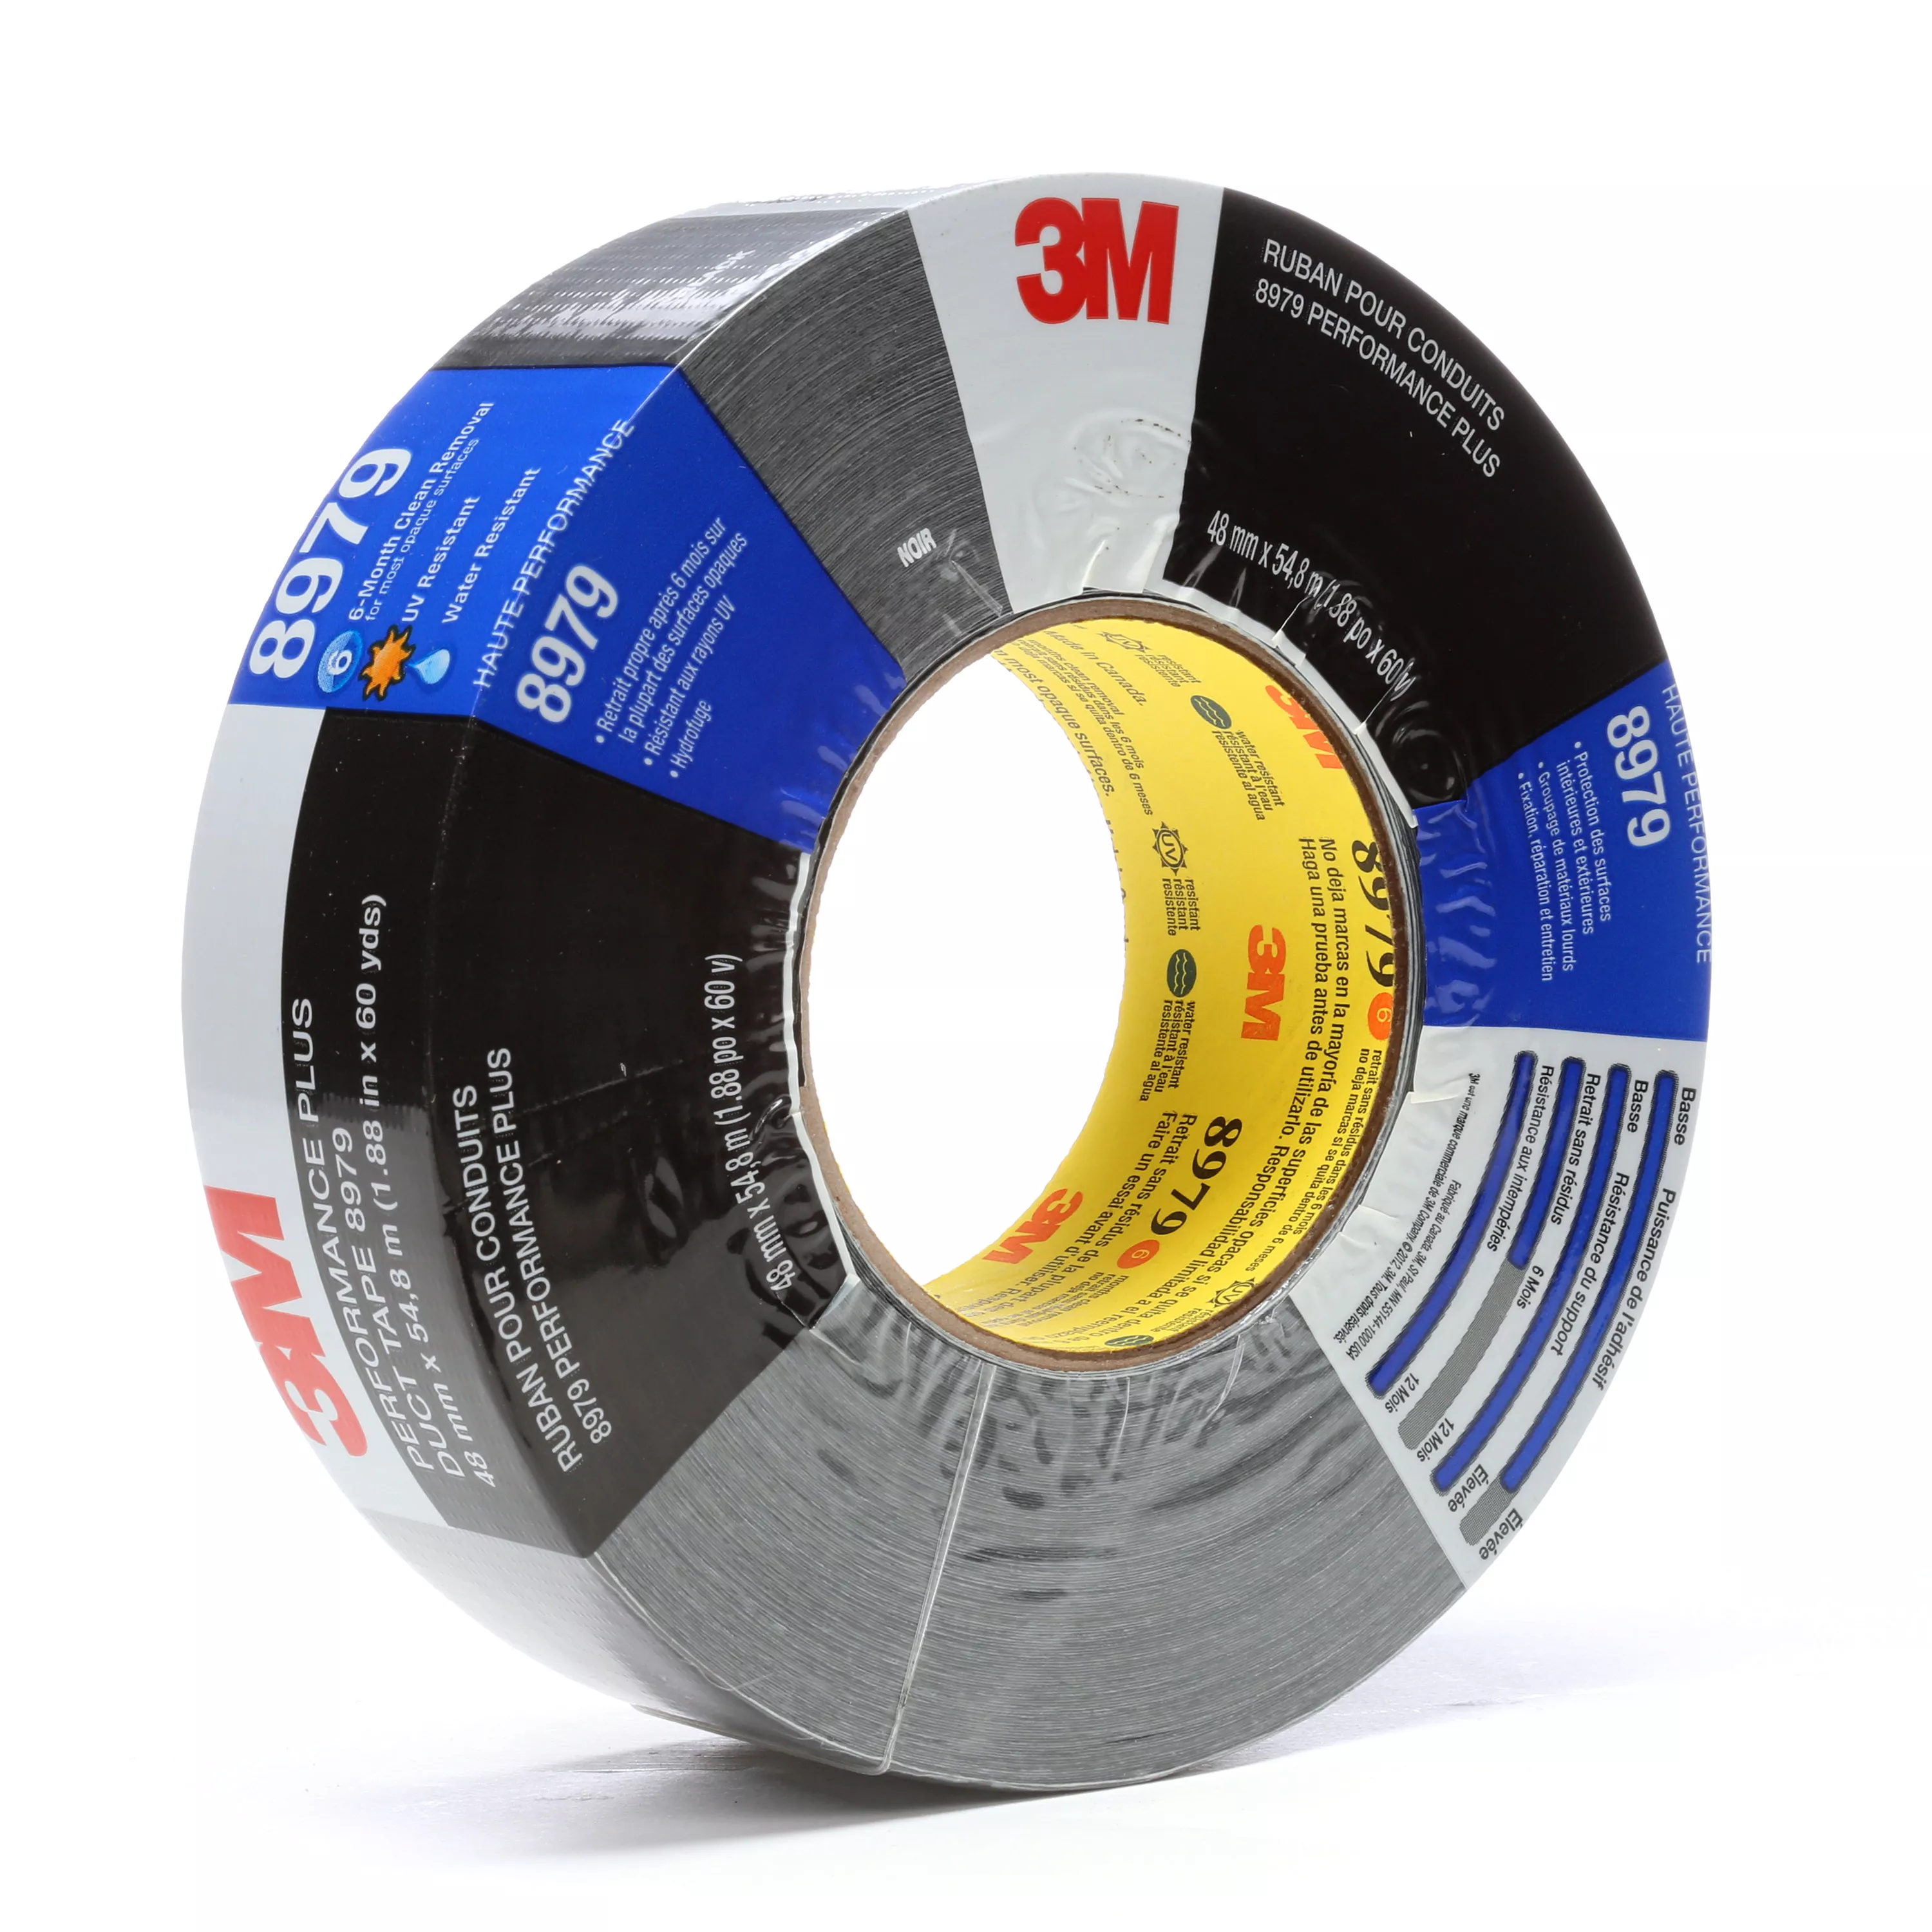 3M™ Performance Plus Duct Tape 8979, Black, 48 mm x 54.8 m, 12.1 mil, 24
Roll/Case, Conveniently Packaged